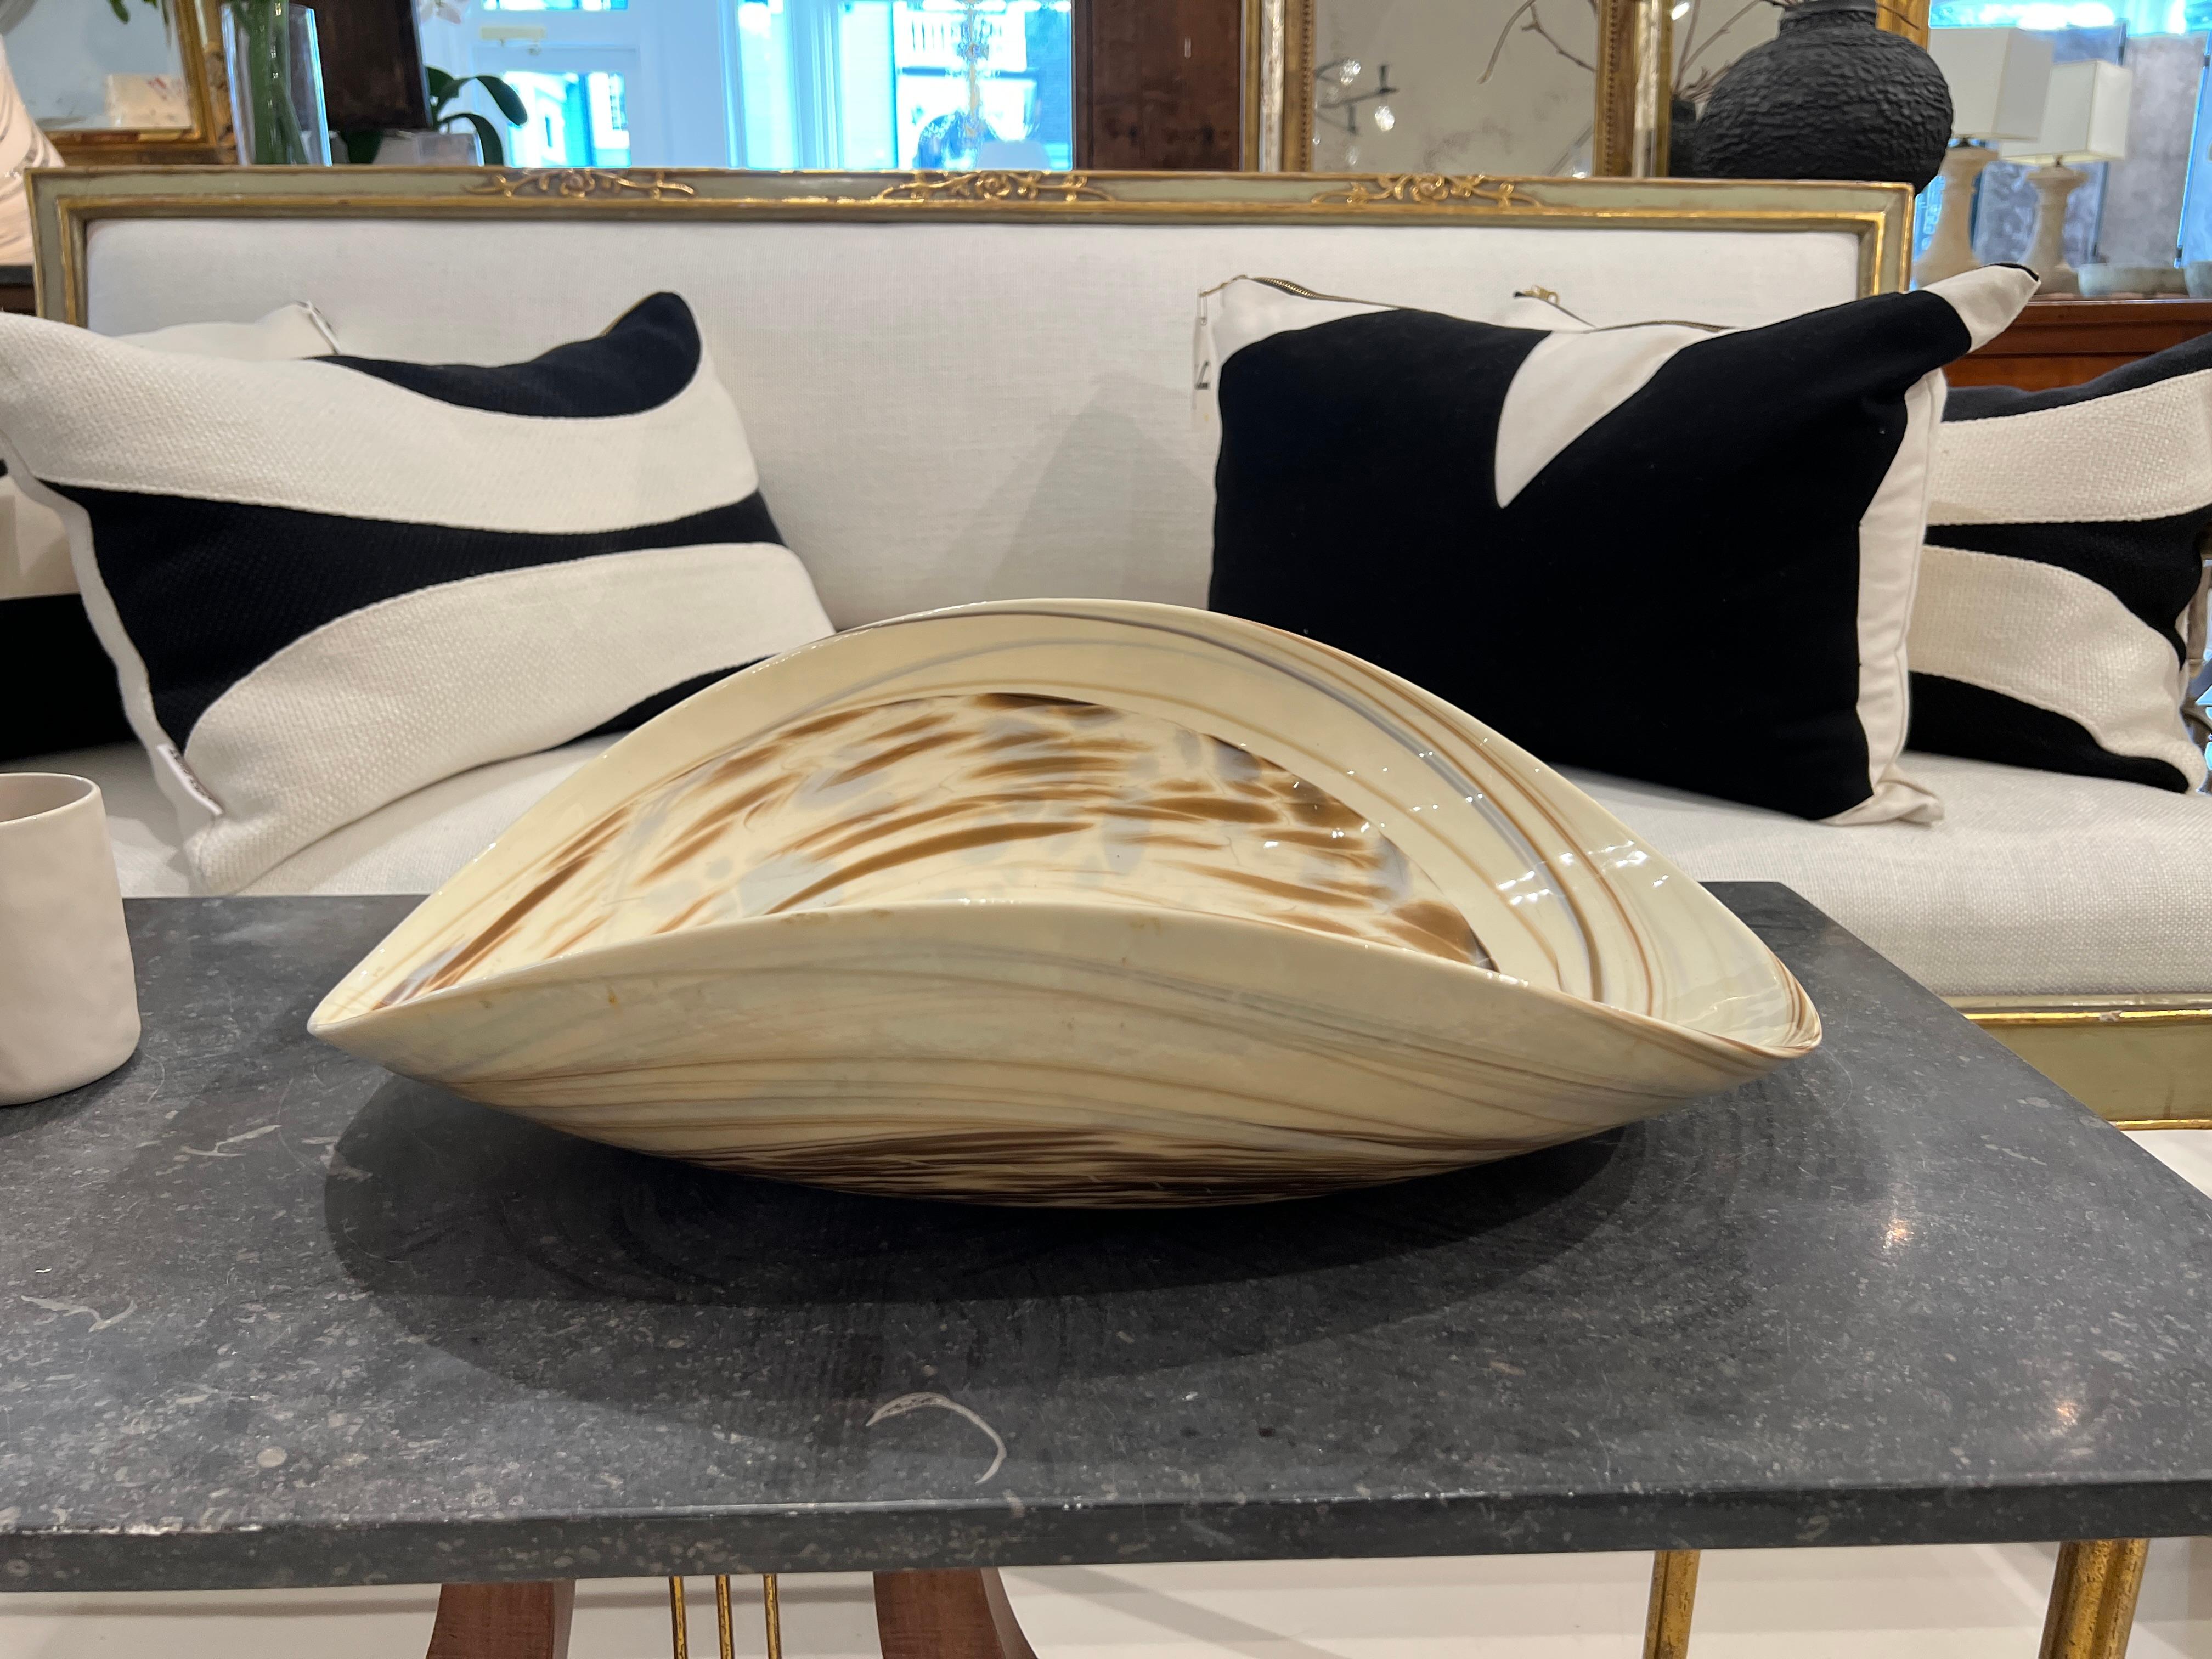 Beautifully made display or serving piece made by Mariposa in Italy